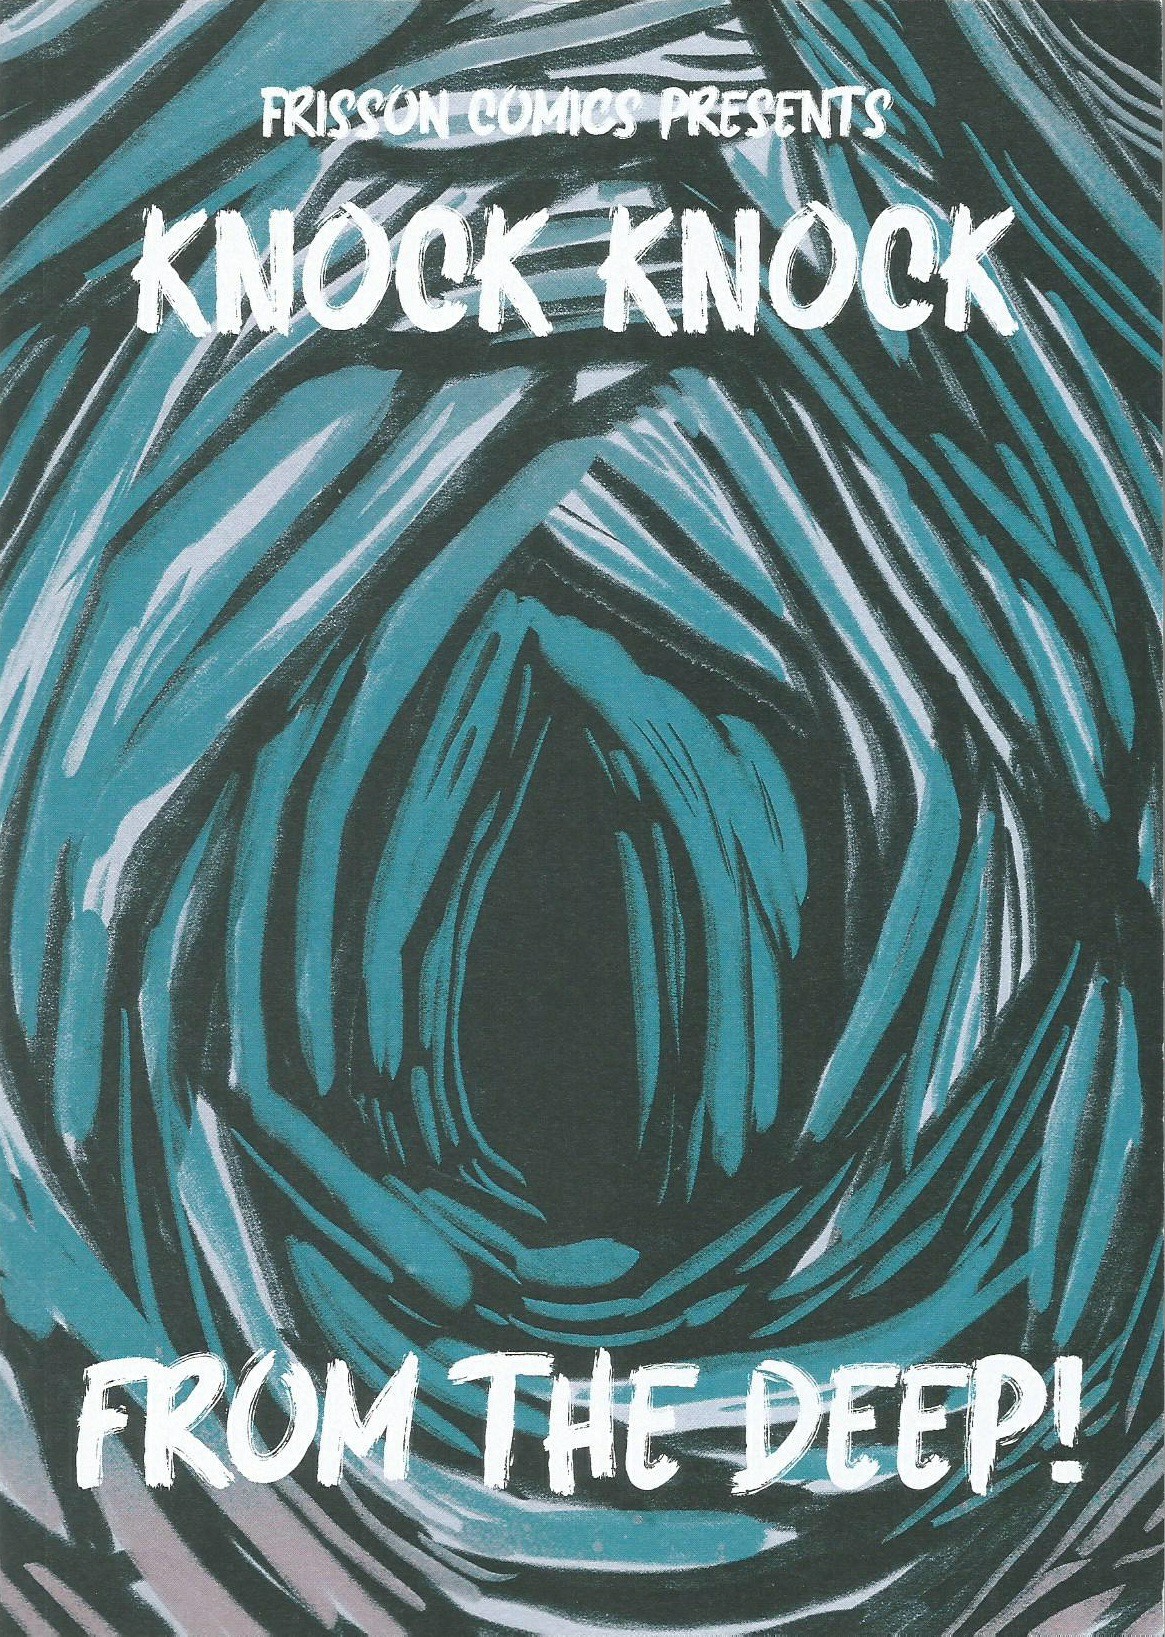 Knock Knock: From The Deep! (Frisson Comics) - 2020